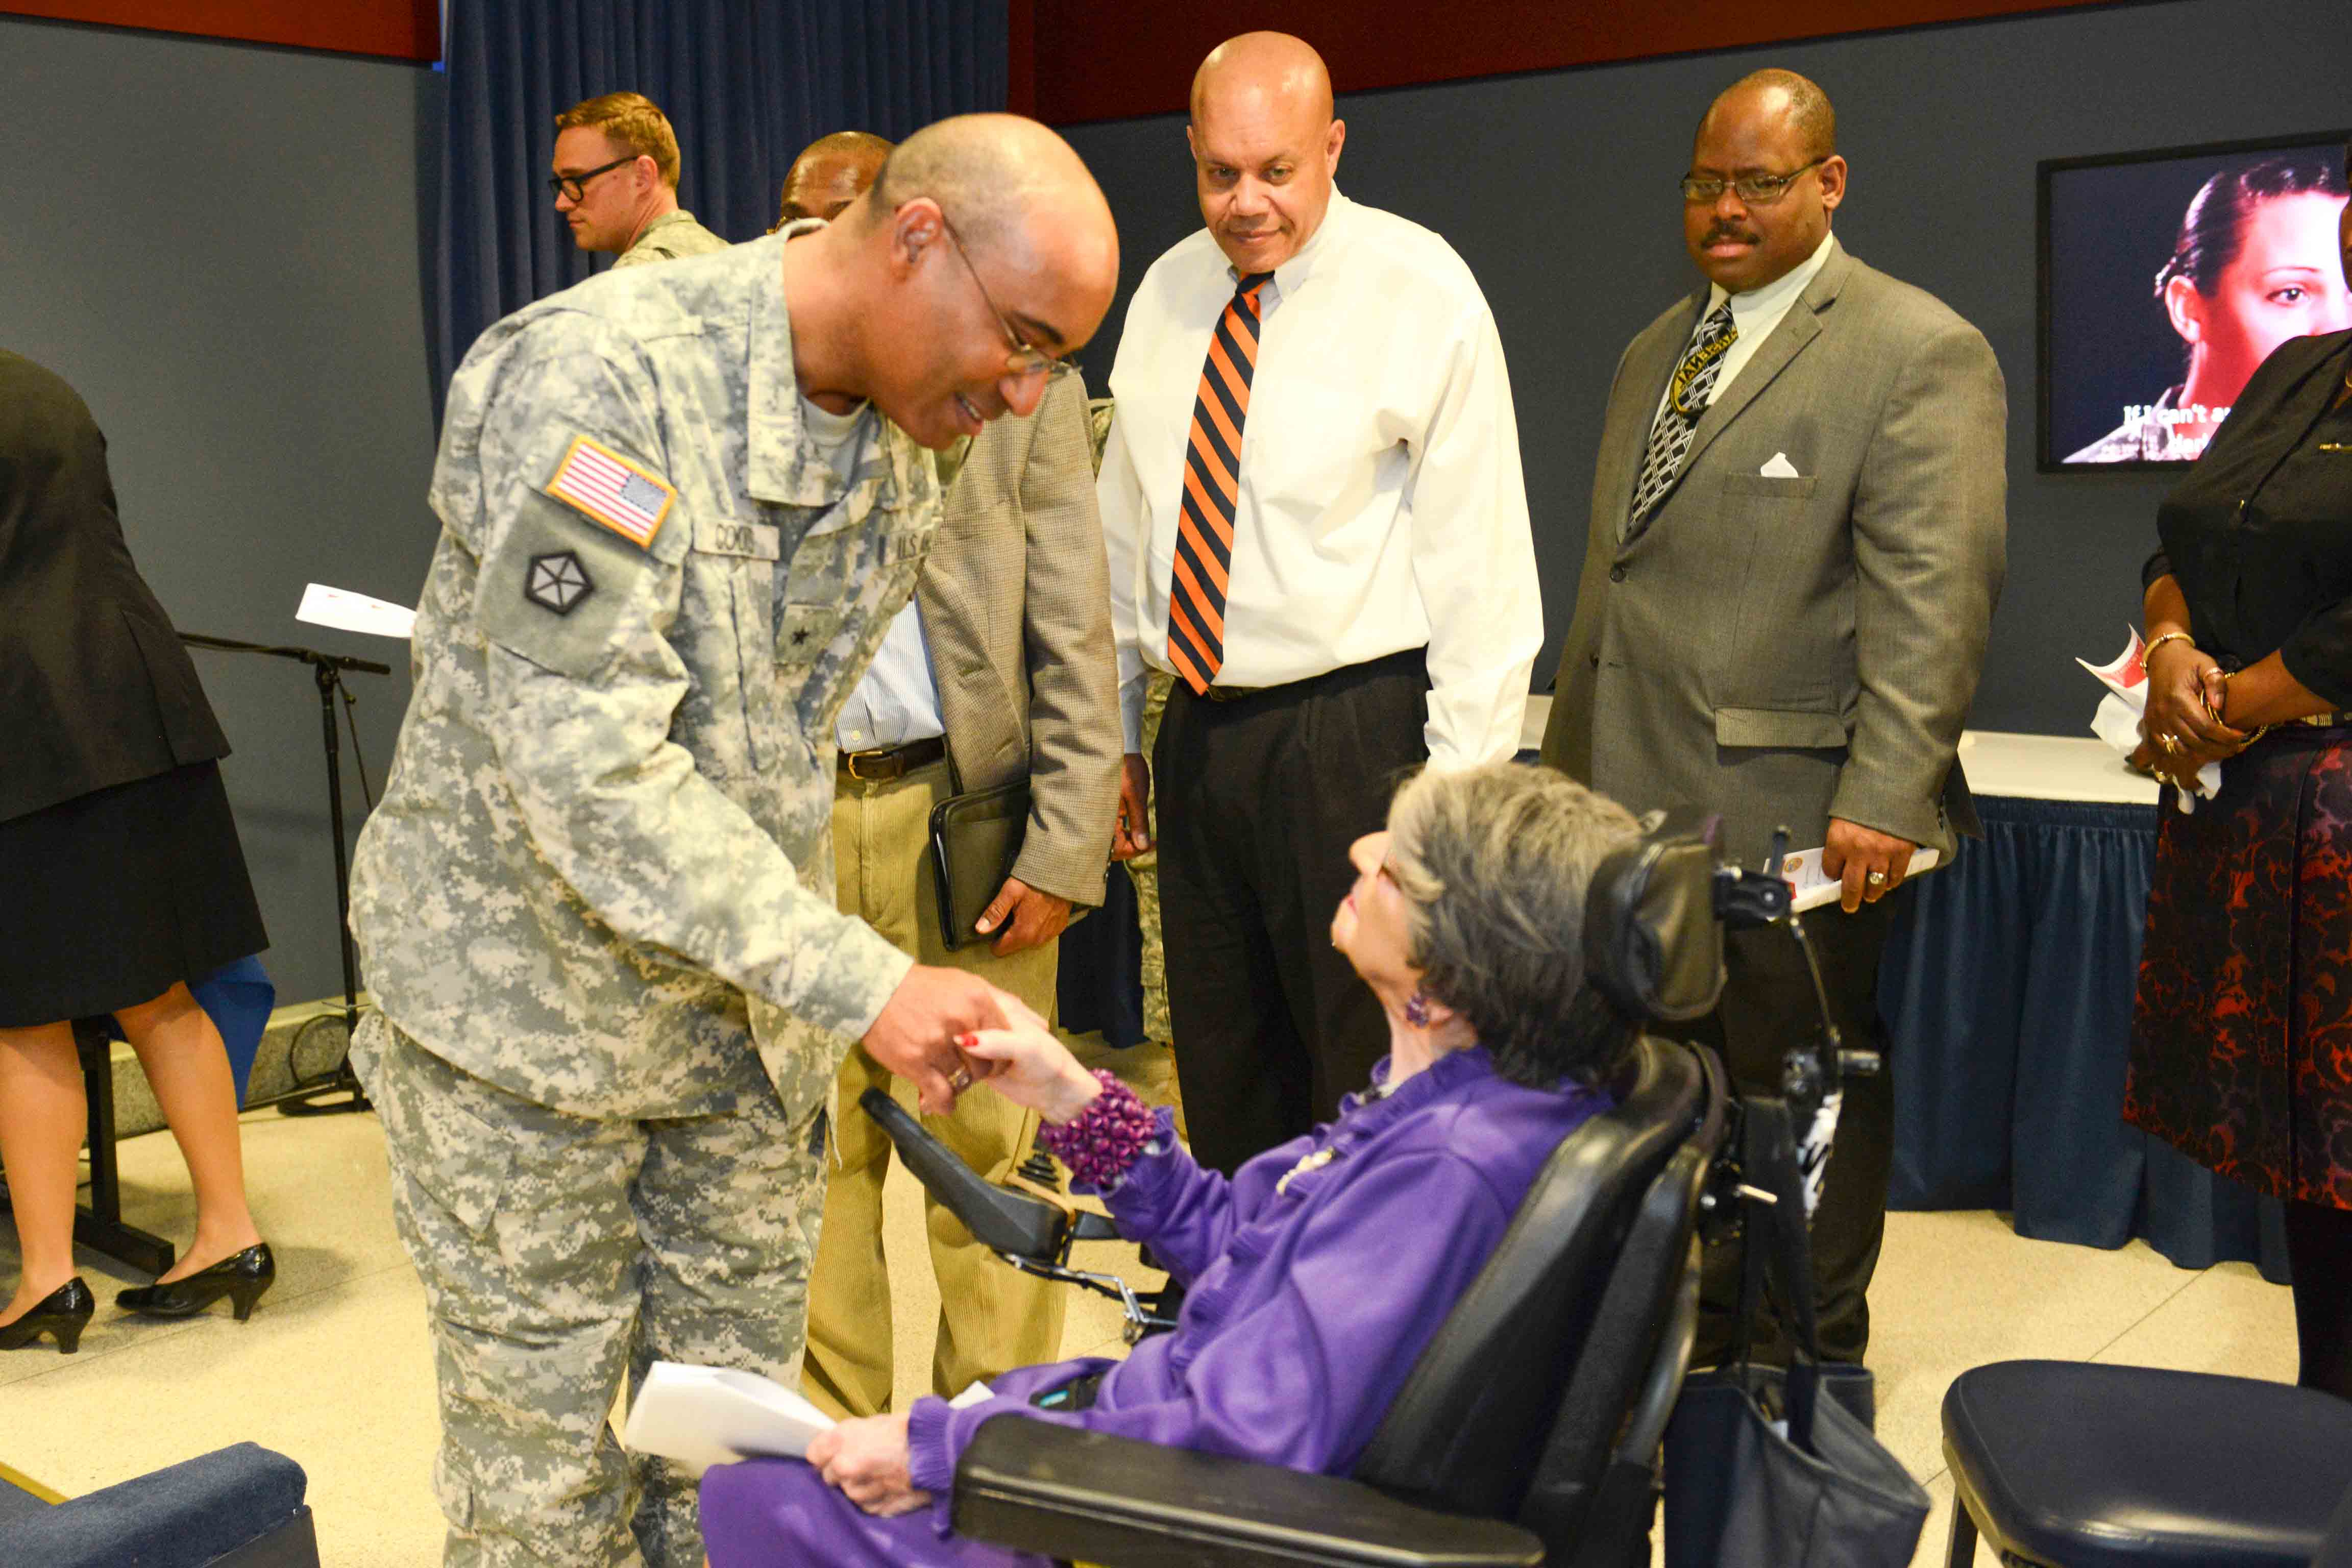 Brig. Gen. Norvell Coots greets World War II Army veteran, 106-year-old Alyce Dixon, after she was honored at the Pentagon. Photo by Lisa Ferdinando (31 March 2014). PD-U.S. Government. Wikimedia Commons.